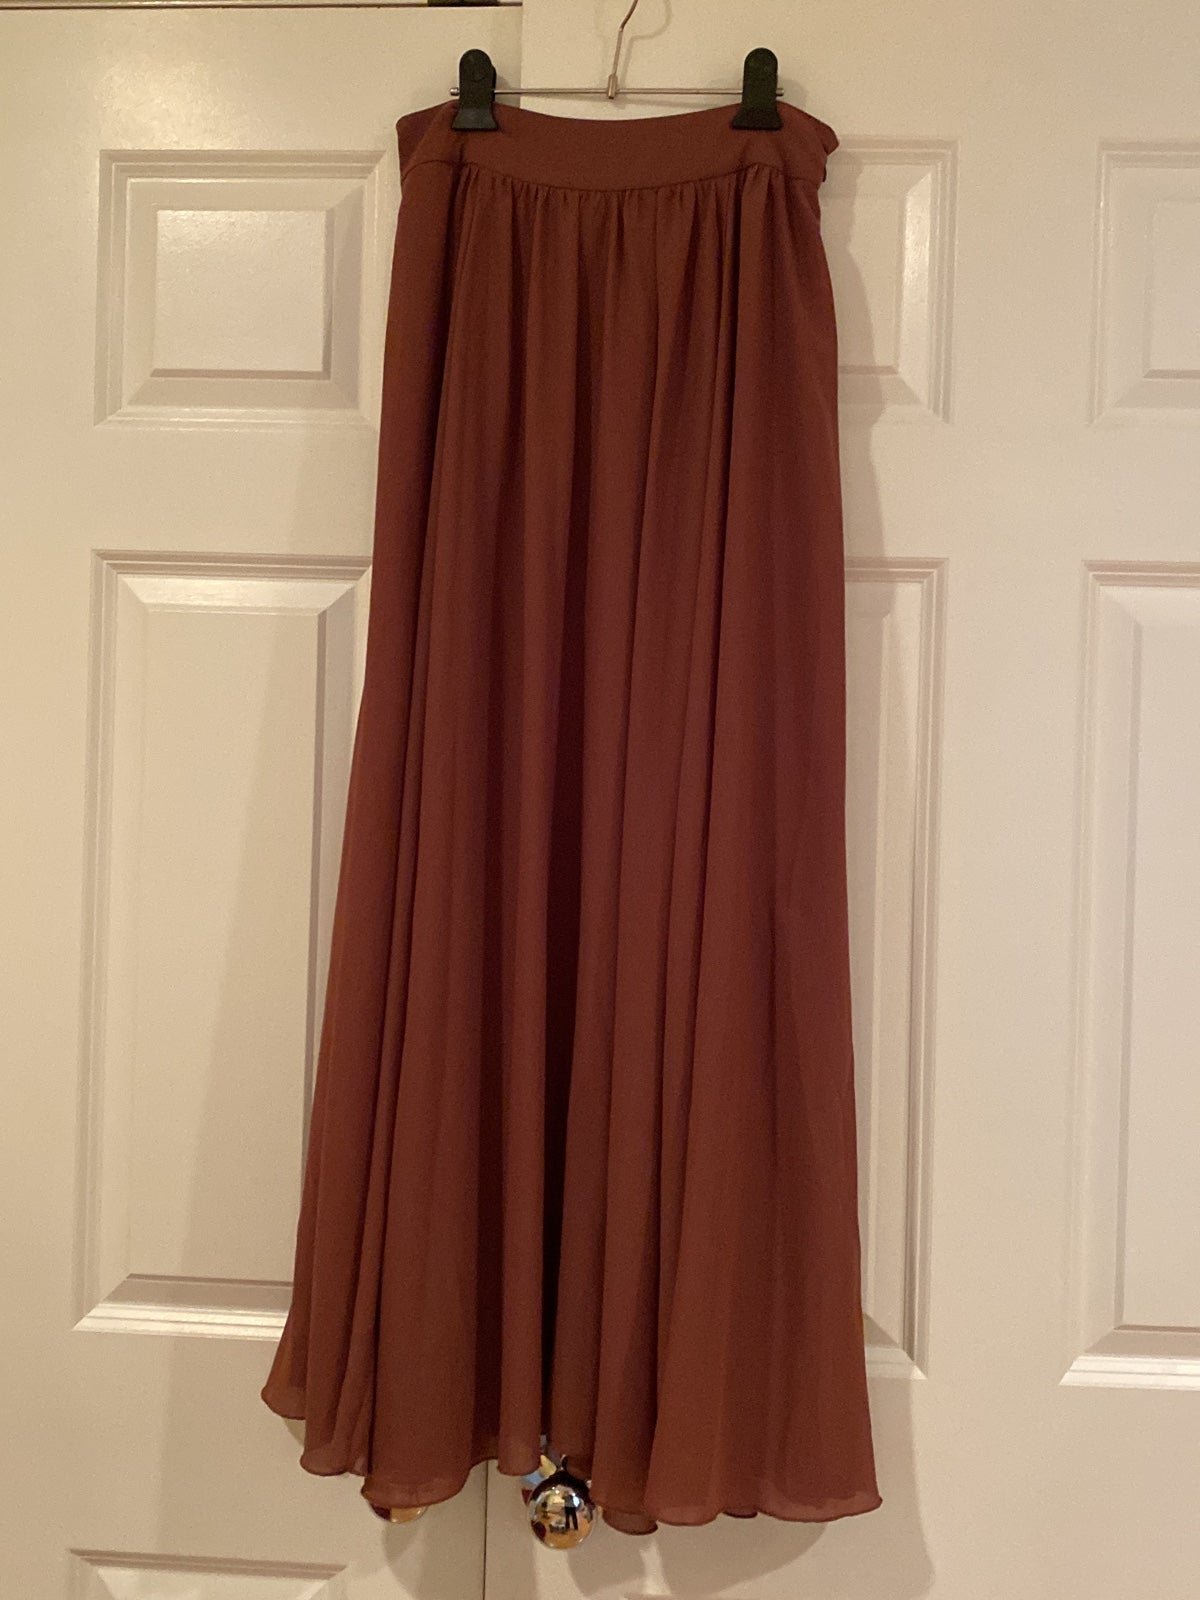 Factory Direct  Anthropologie Maxi Skirt tag size 0 but